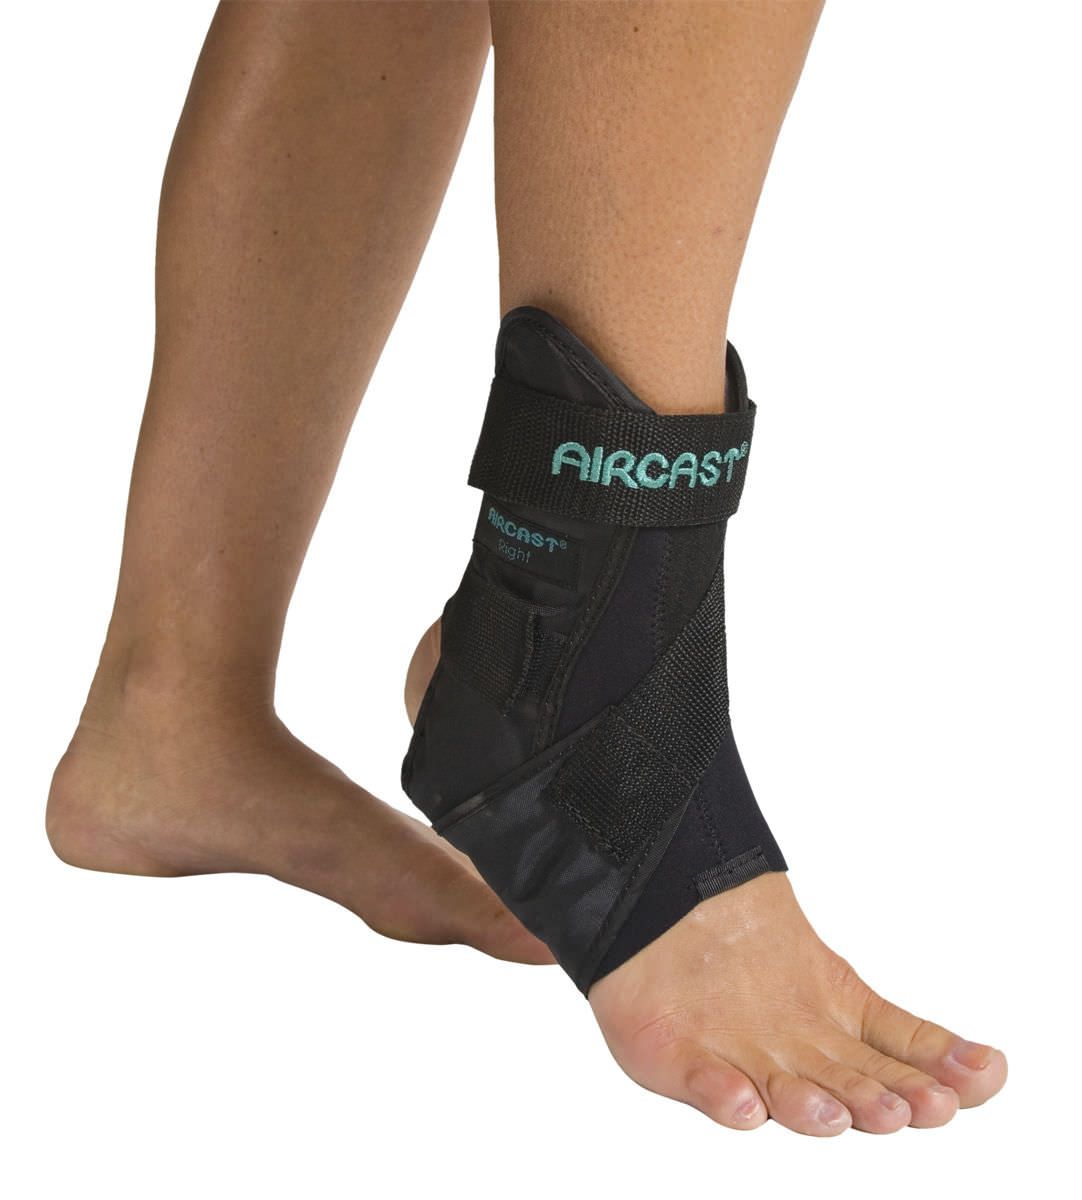 (orthopedic immobilization) AirSport™ Aircast